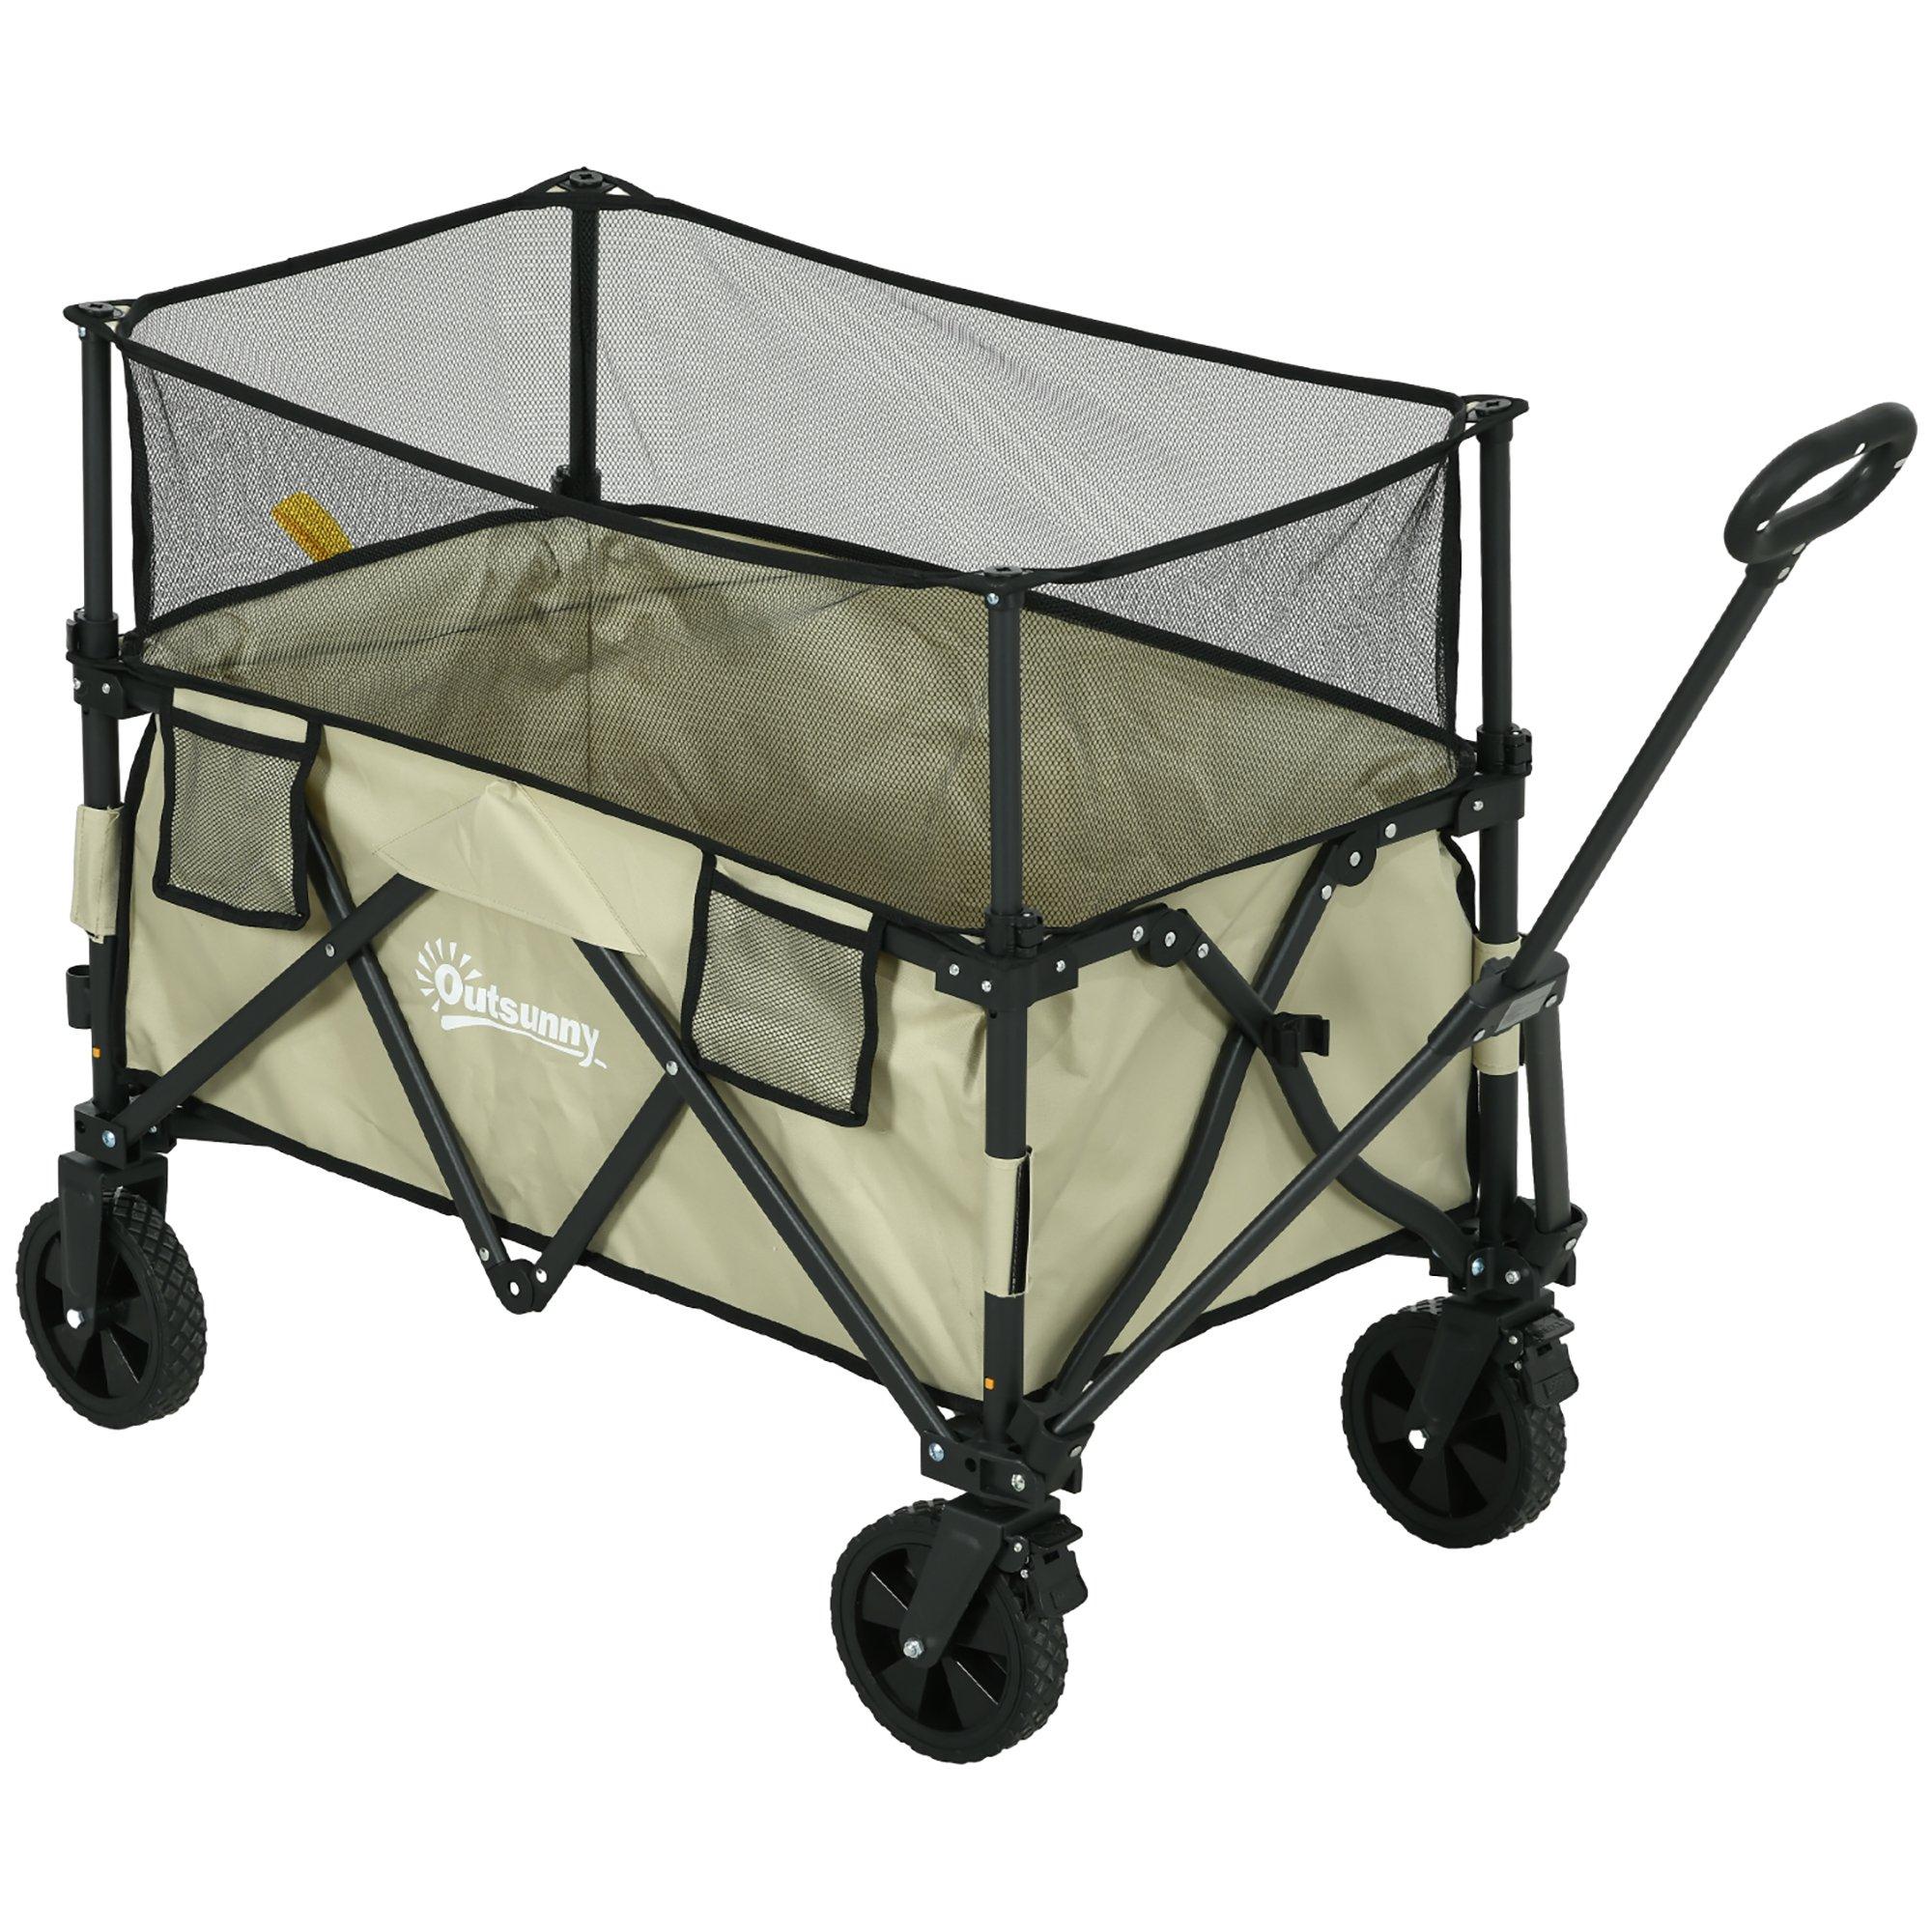 180L Folding Garden Trolley Wagon Cart with Extendable Side Walls